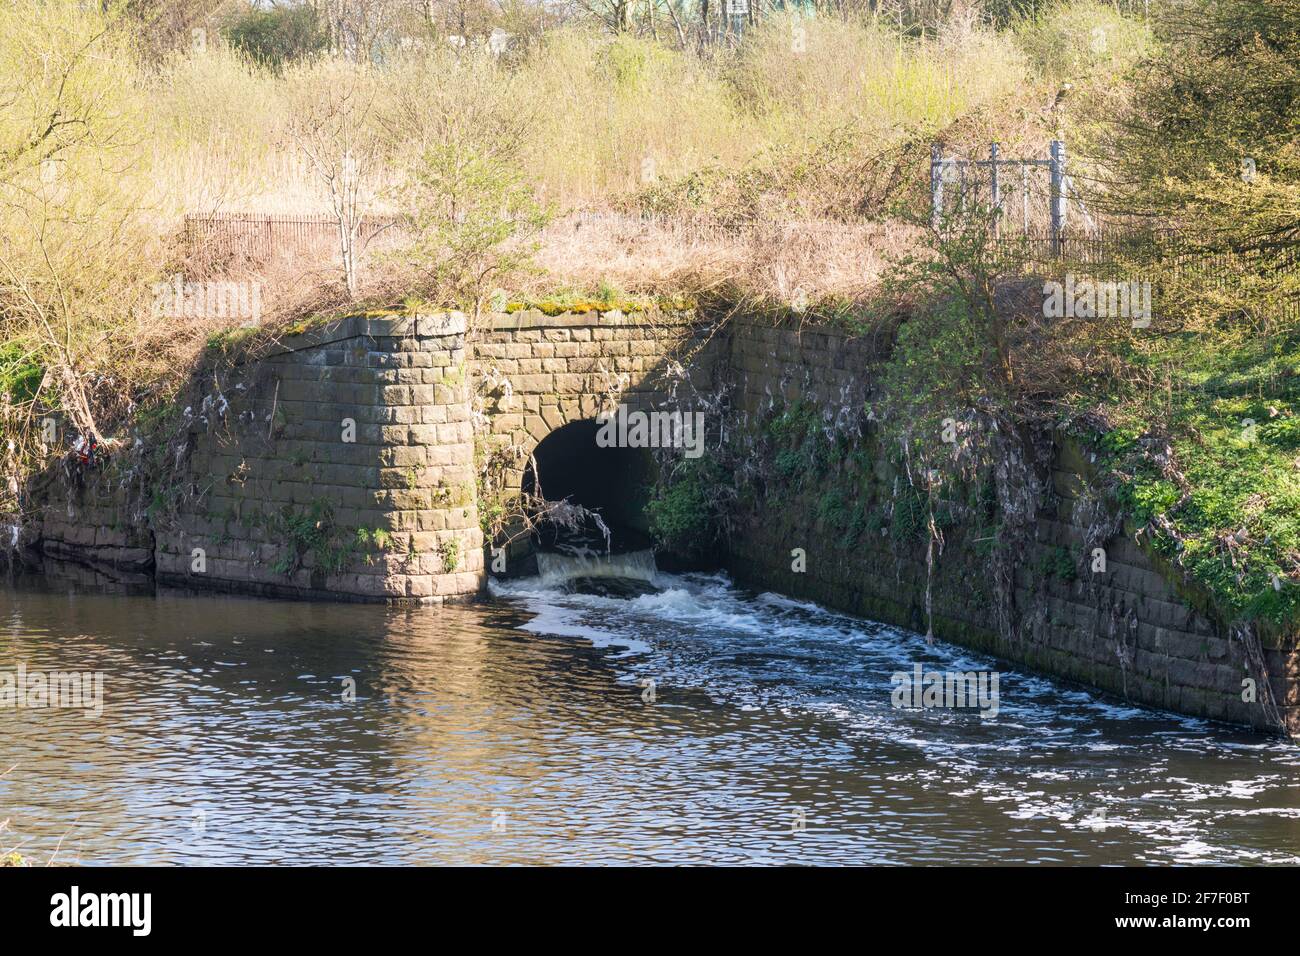 Outfall from stone arched culvert into the river Mersey in Heaton Mersey, Greater Manchester, England, UK Stock Photo